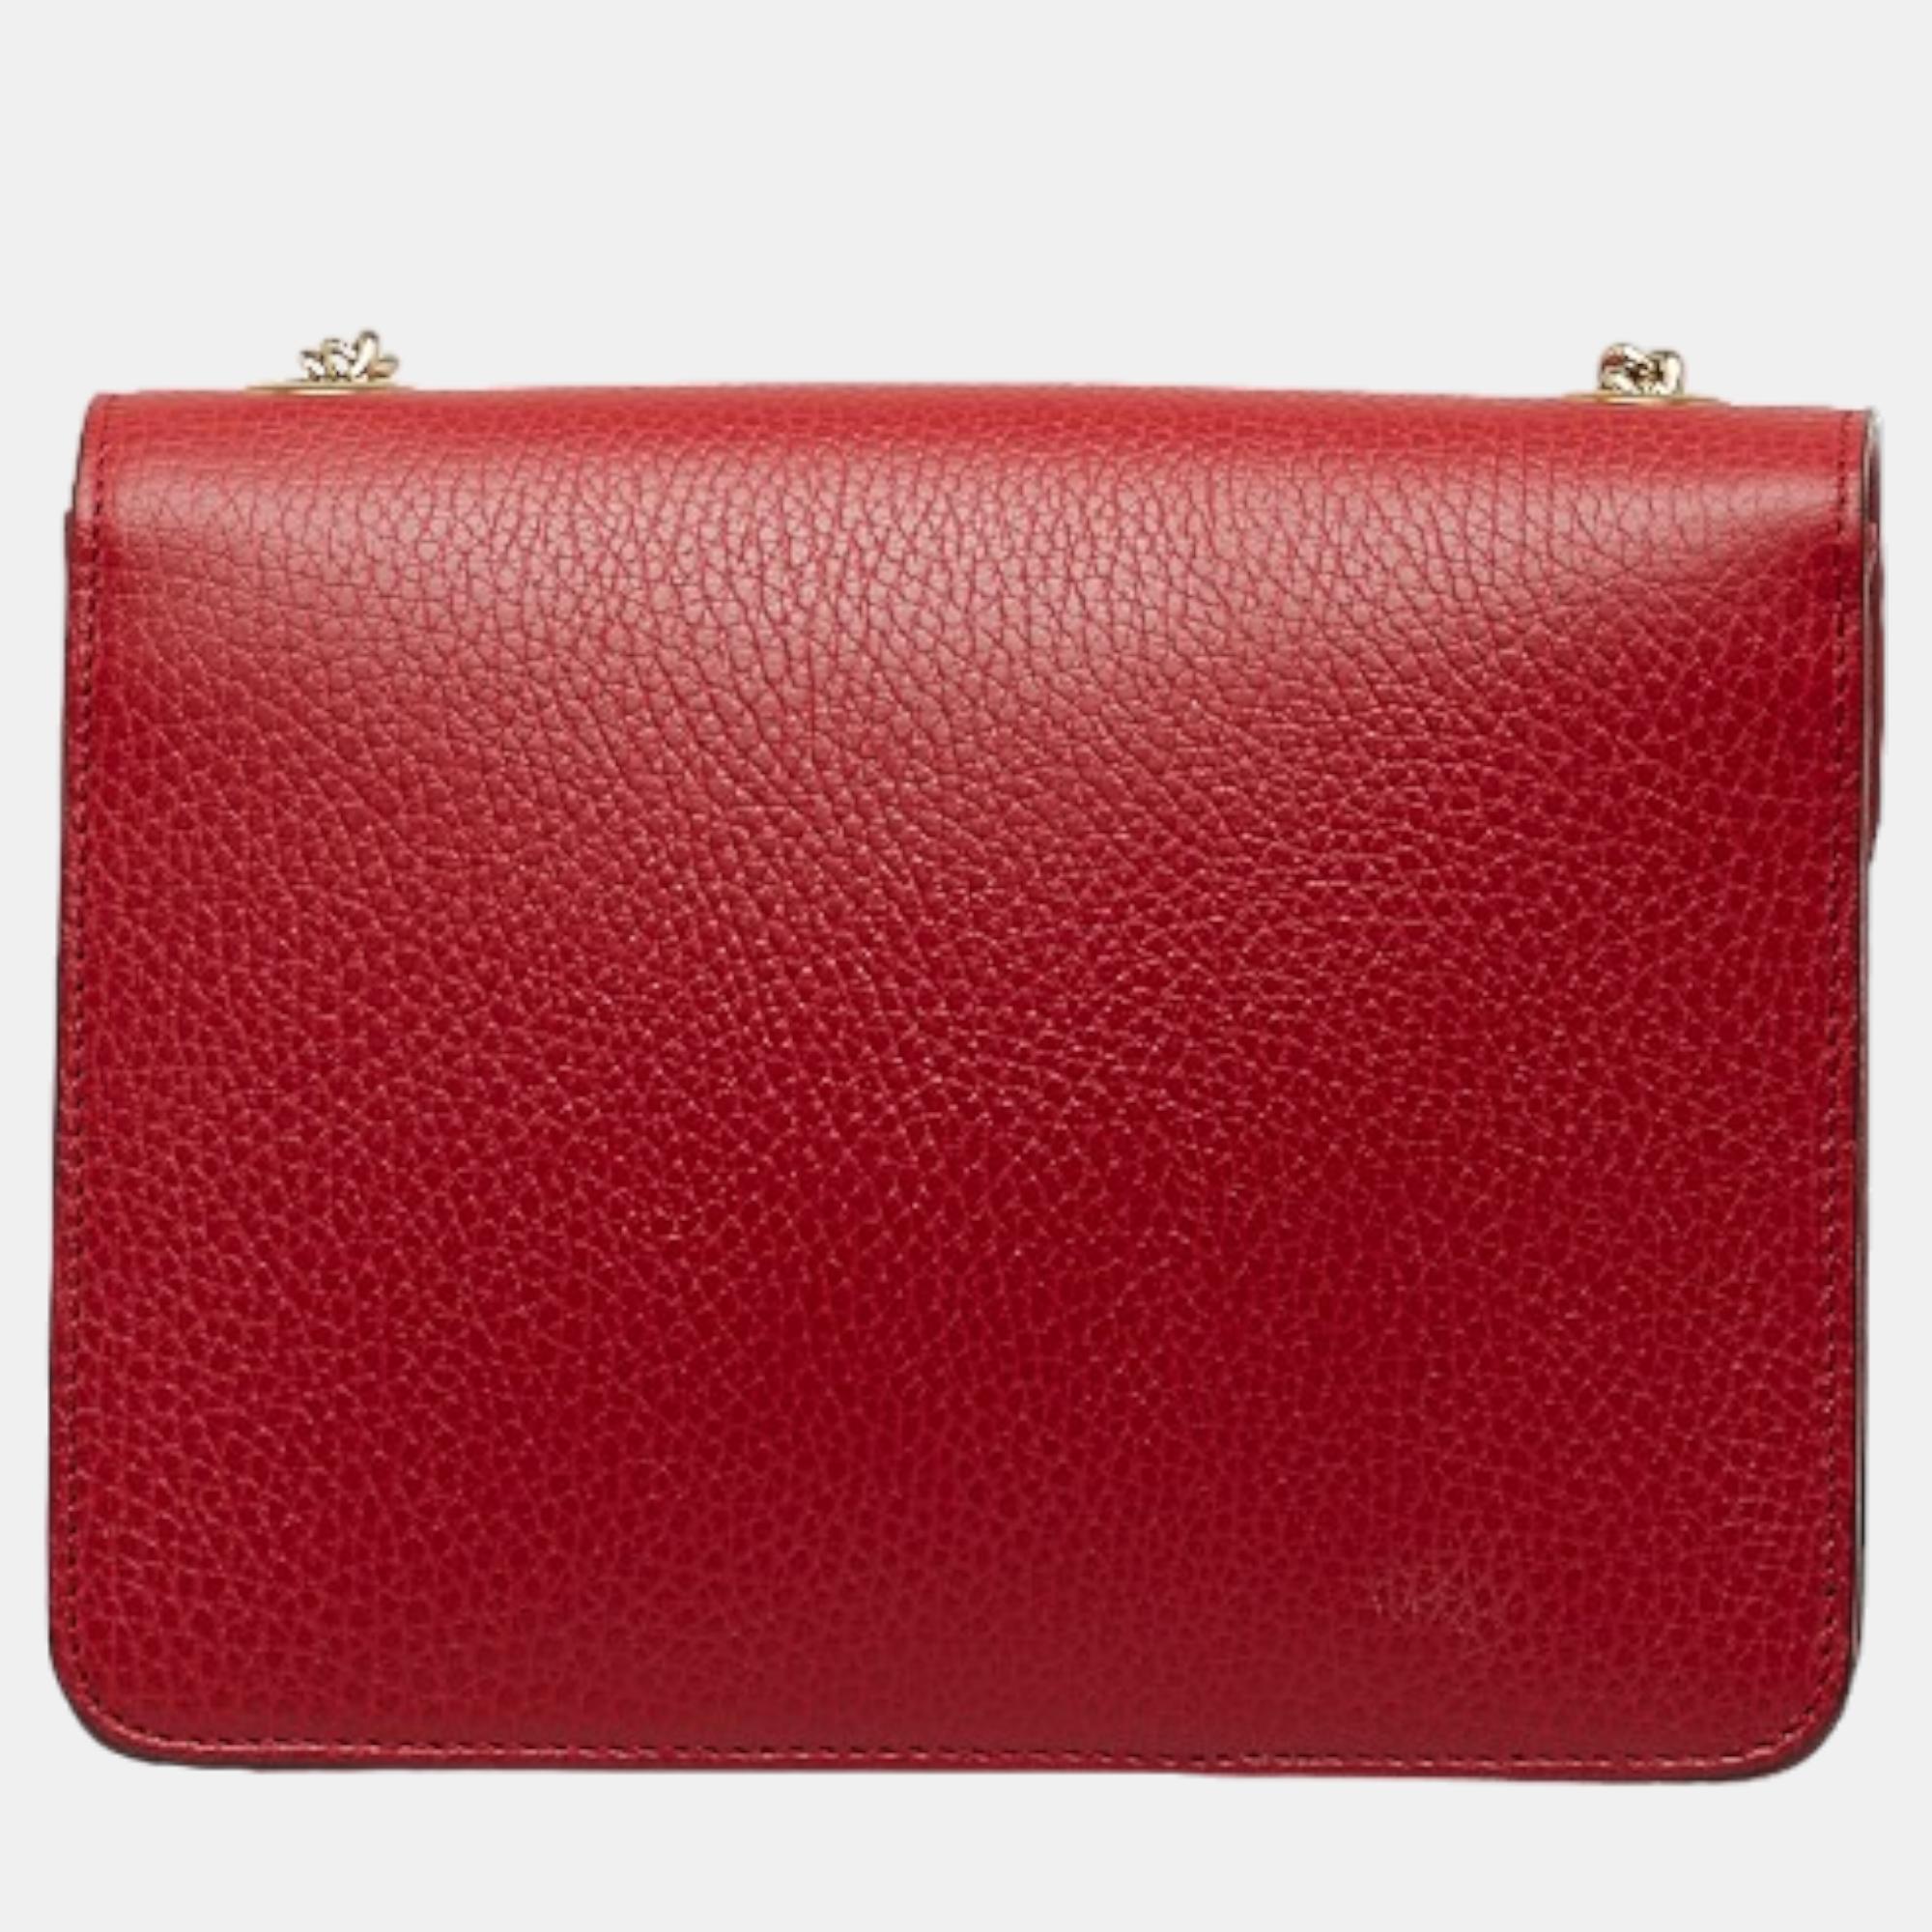 Gucci Red Leather Small Interlocking G Shoulder Bag